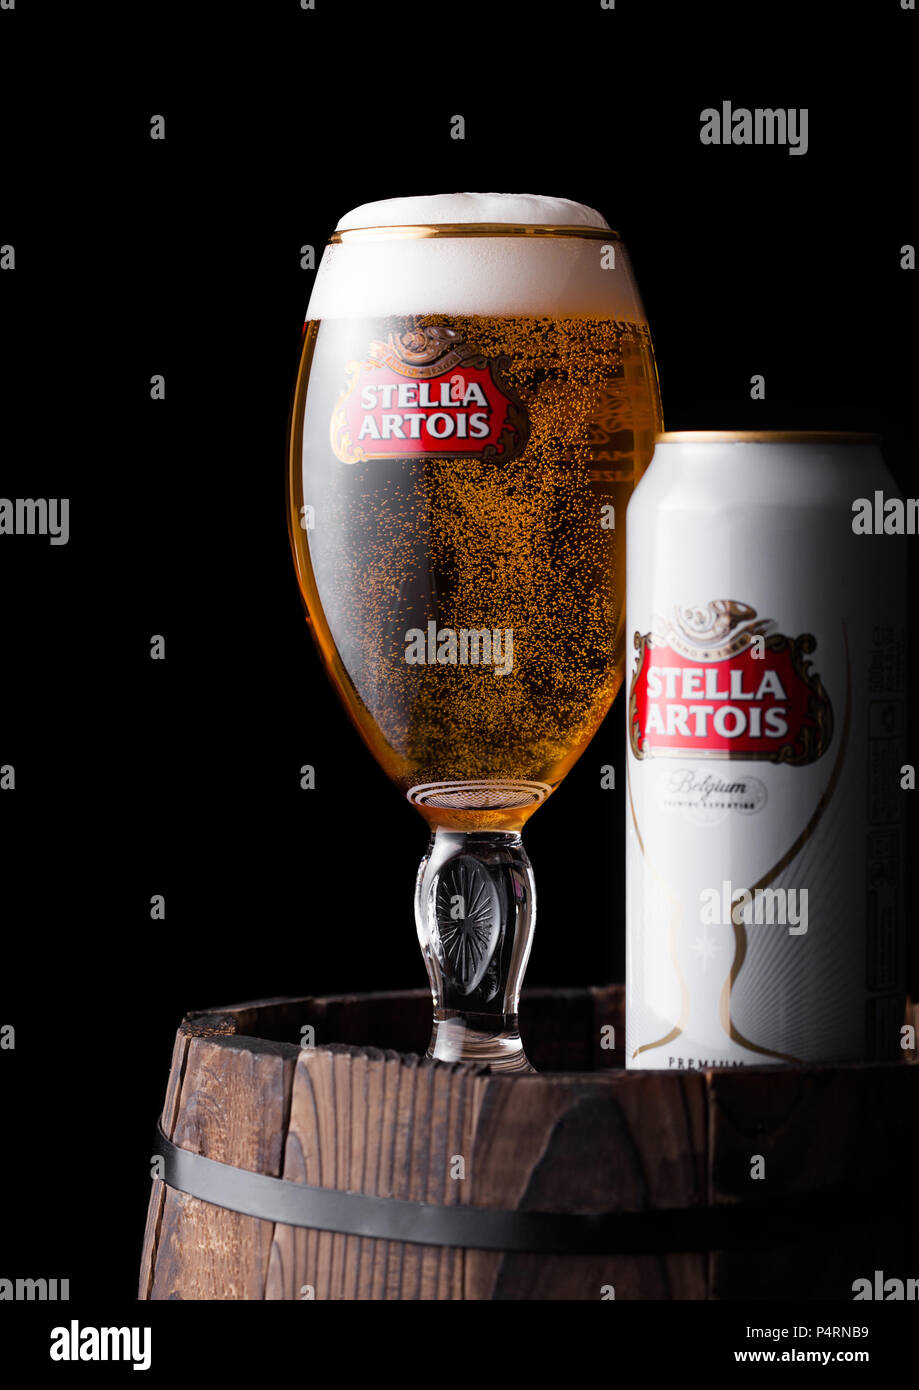 LONDON, UK - JUNE 06, 2018: Cold glass and aluminium can of Stella Artois beer on old wooden barrel on black background. Stock Photo